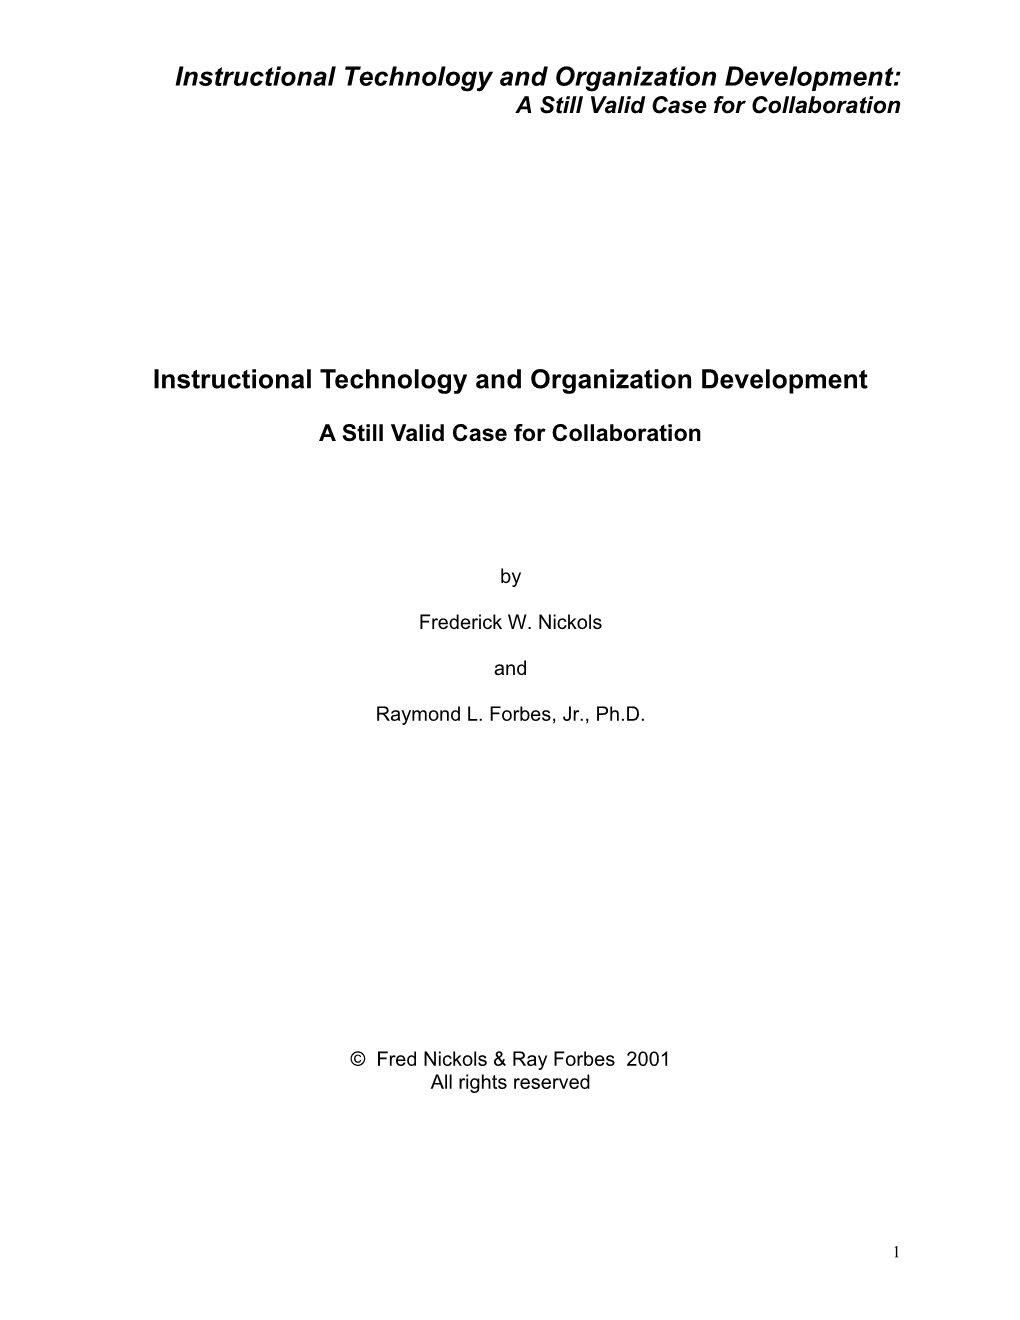 Instructional Technology and Organization Development: a Still Valid Case for Collaboration